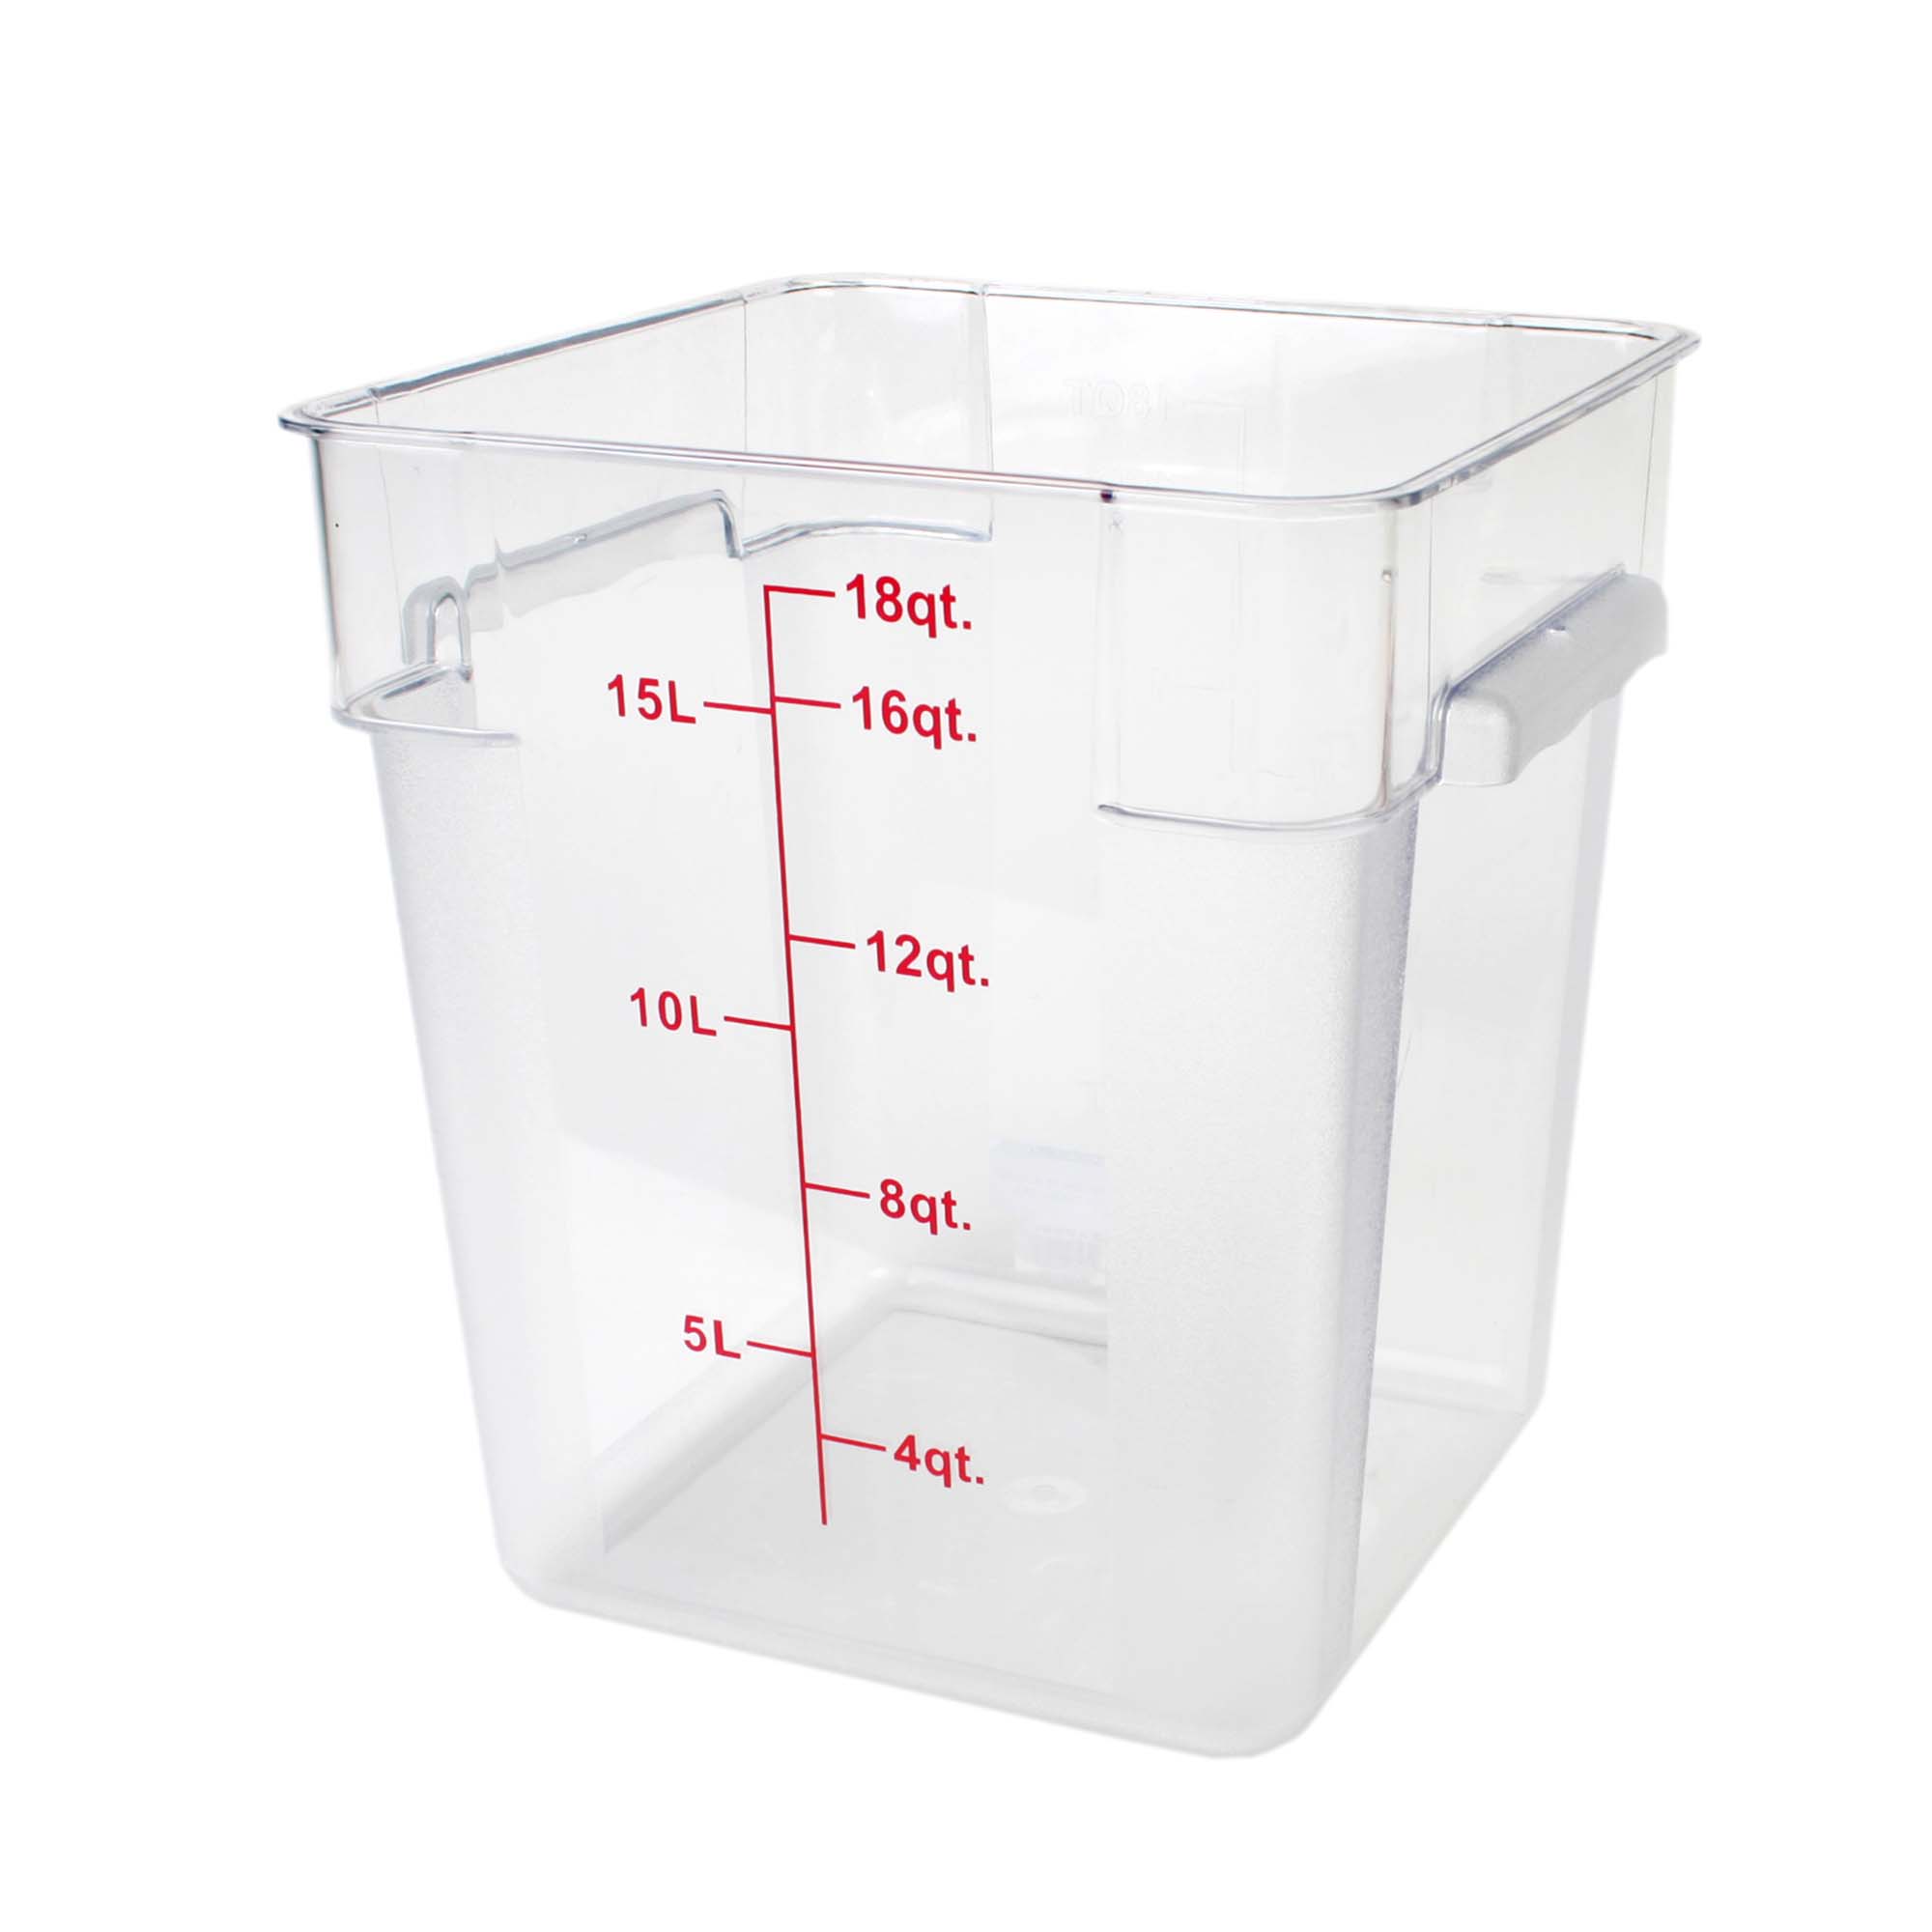 Thunder Group 2 quart/ 2 liter polycarbonate measuring cup, comes in each